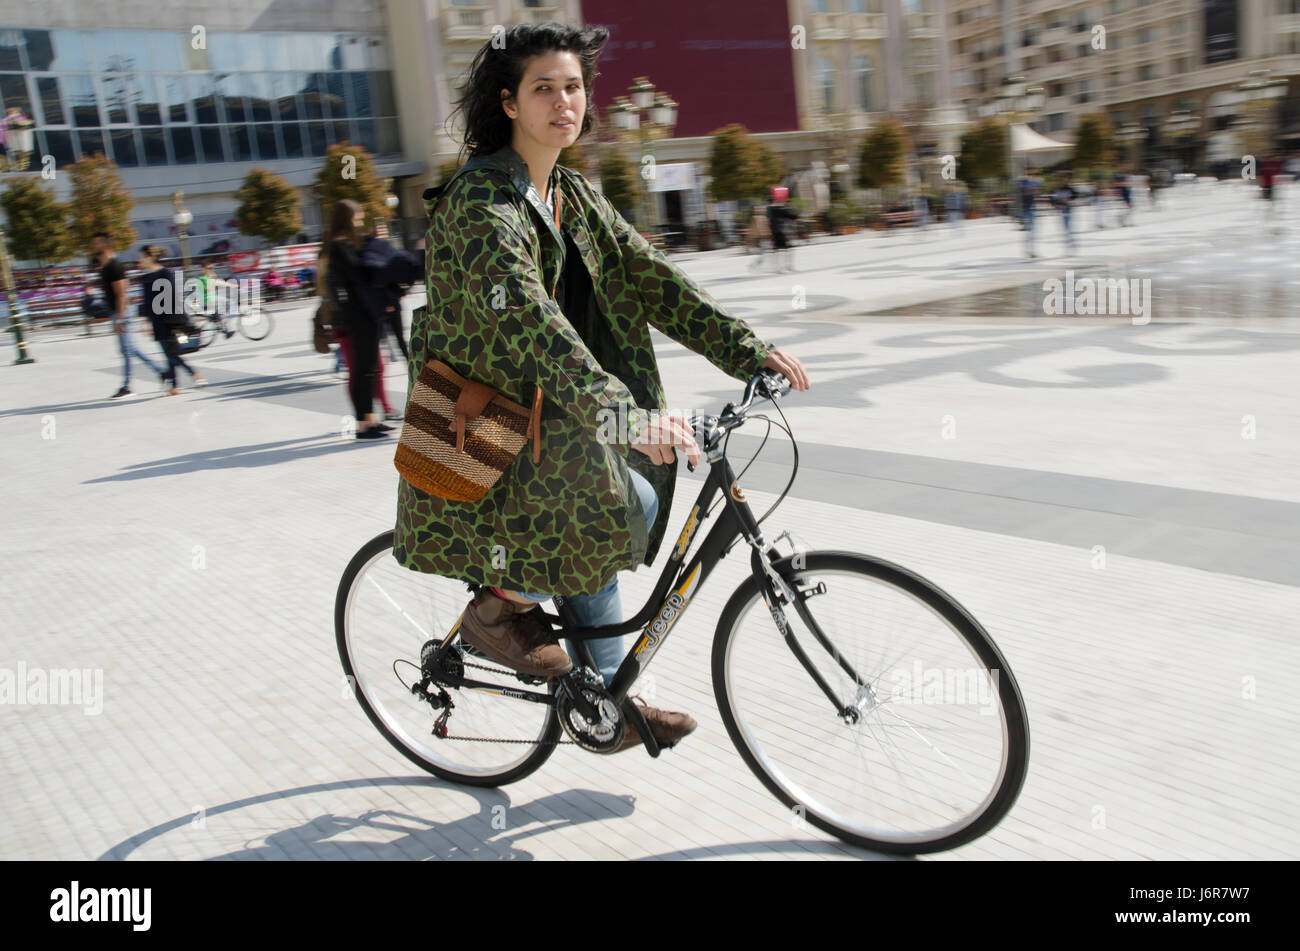 Woman with camouflage raincoat riding bicycle in Skopje square. Stock Photo